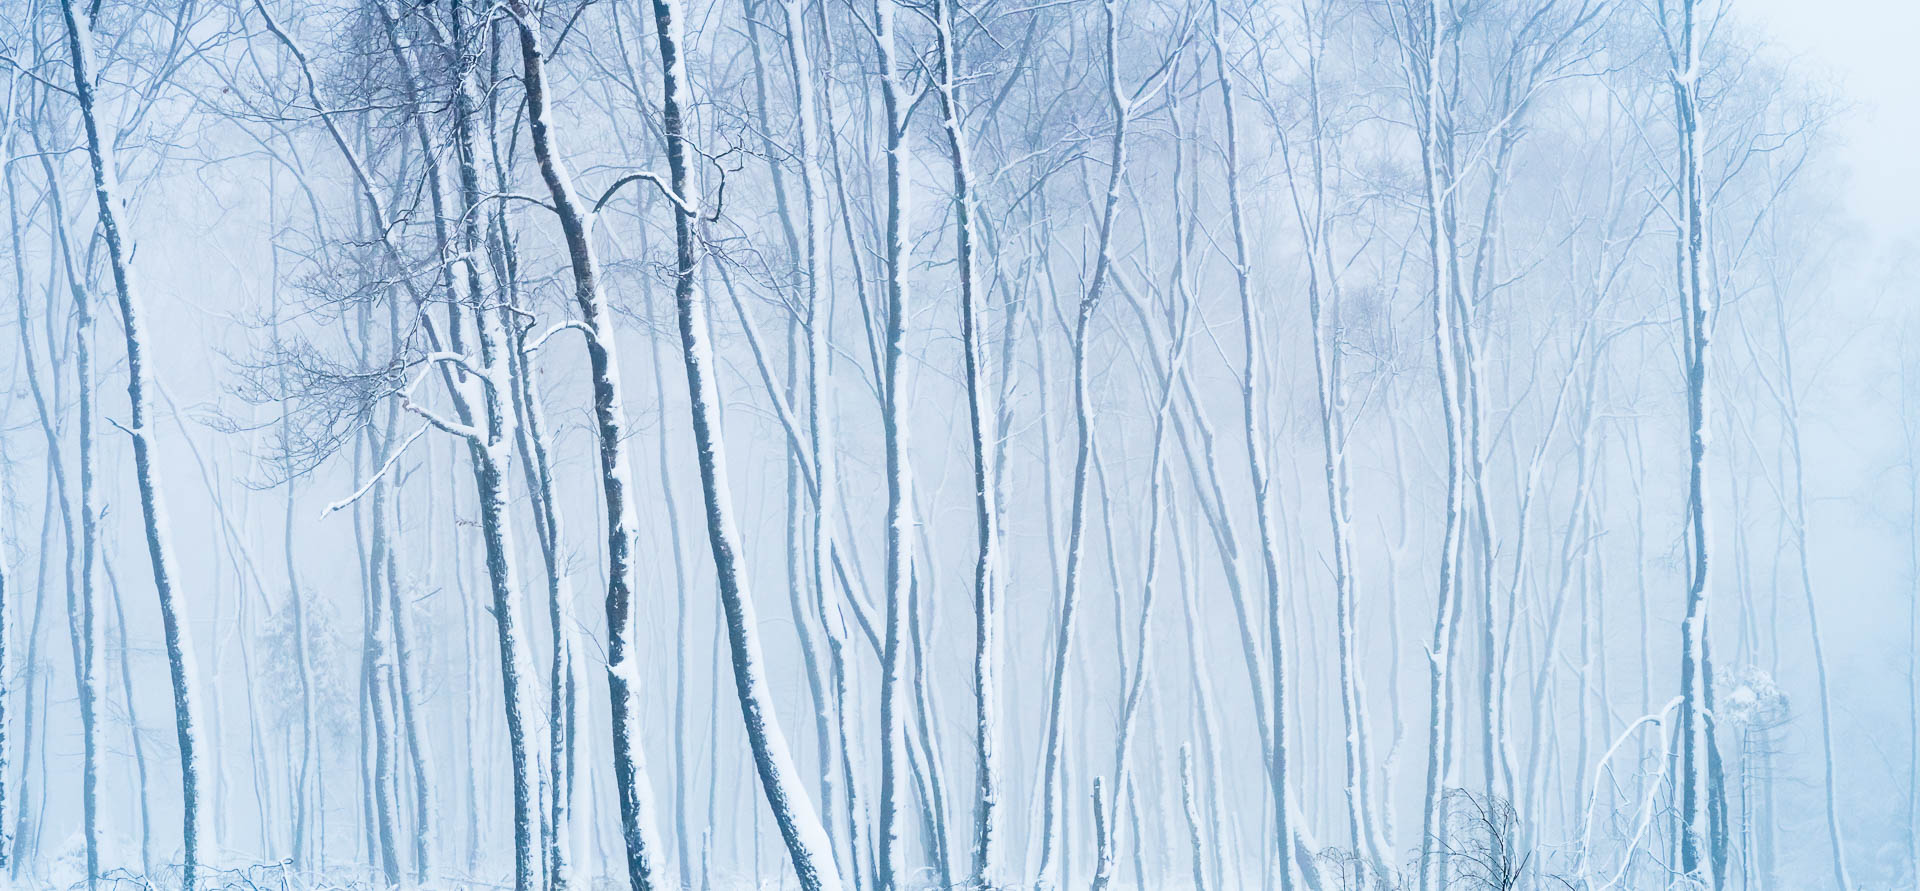 Snowy trees in the fog (Ternell, Belgium)